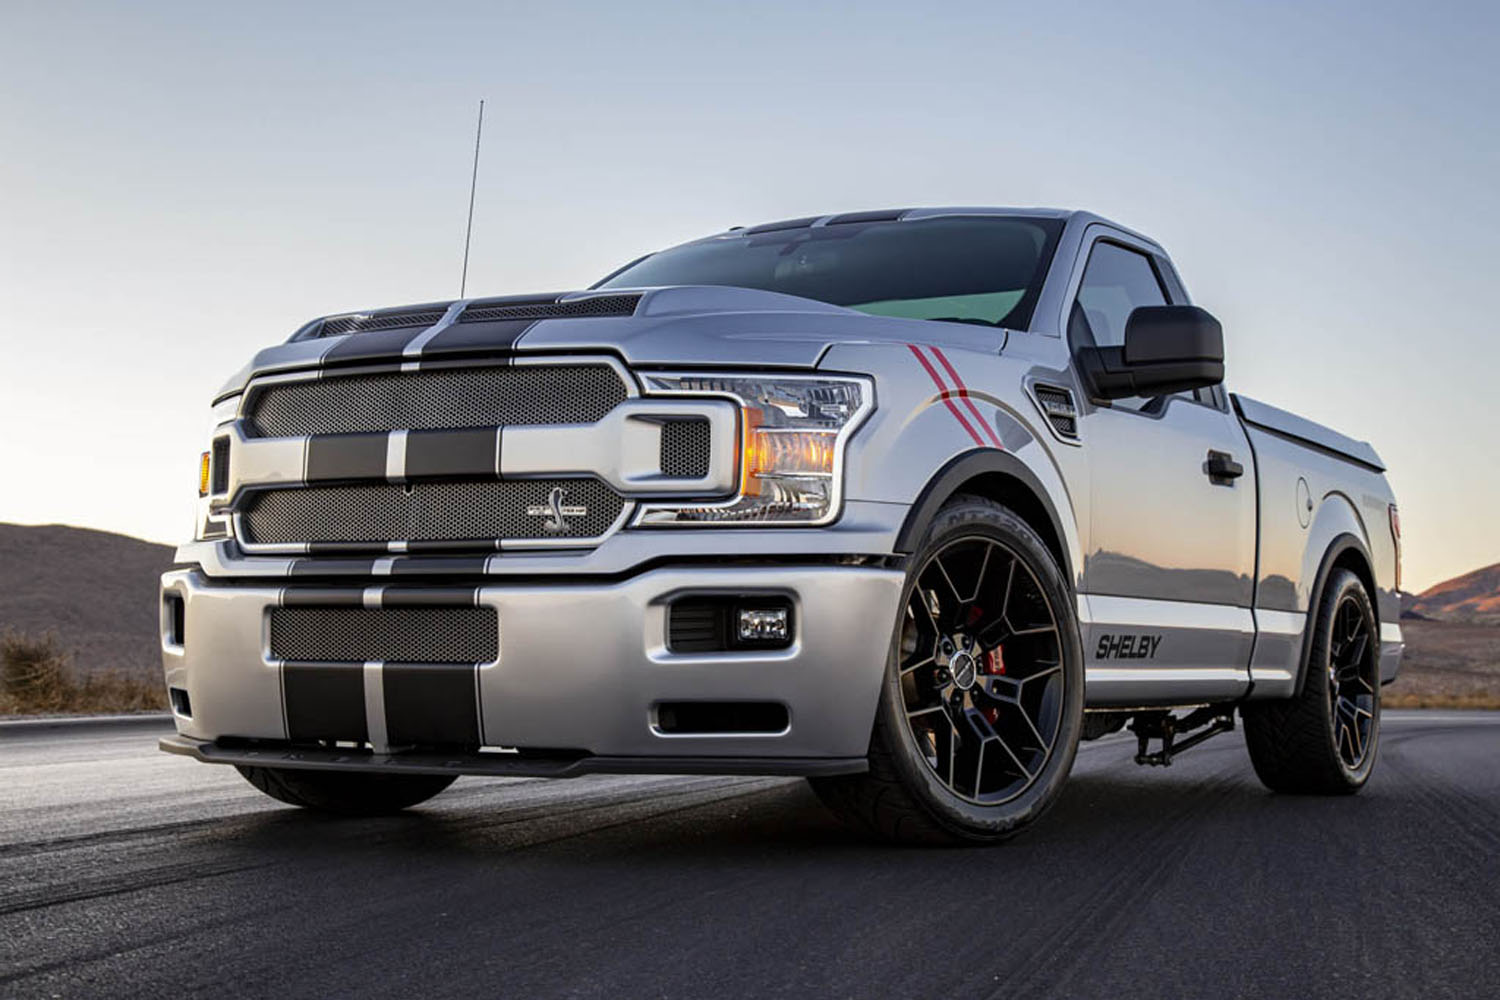 Shelby Super Snake Sport F150 Is The New Lightning We All Want